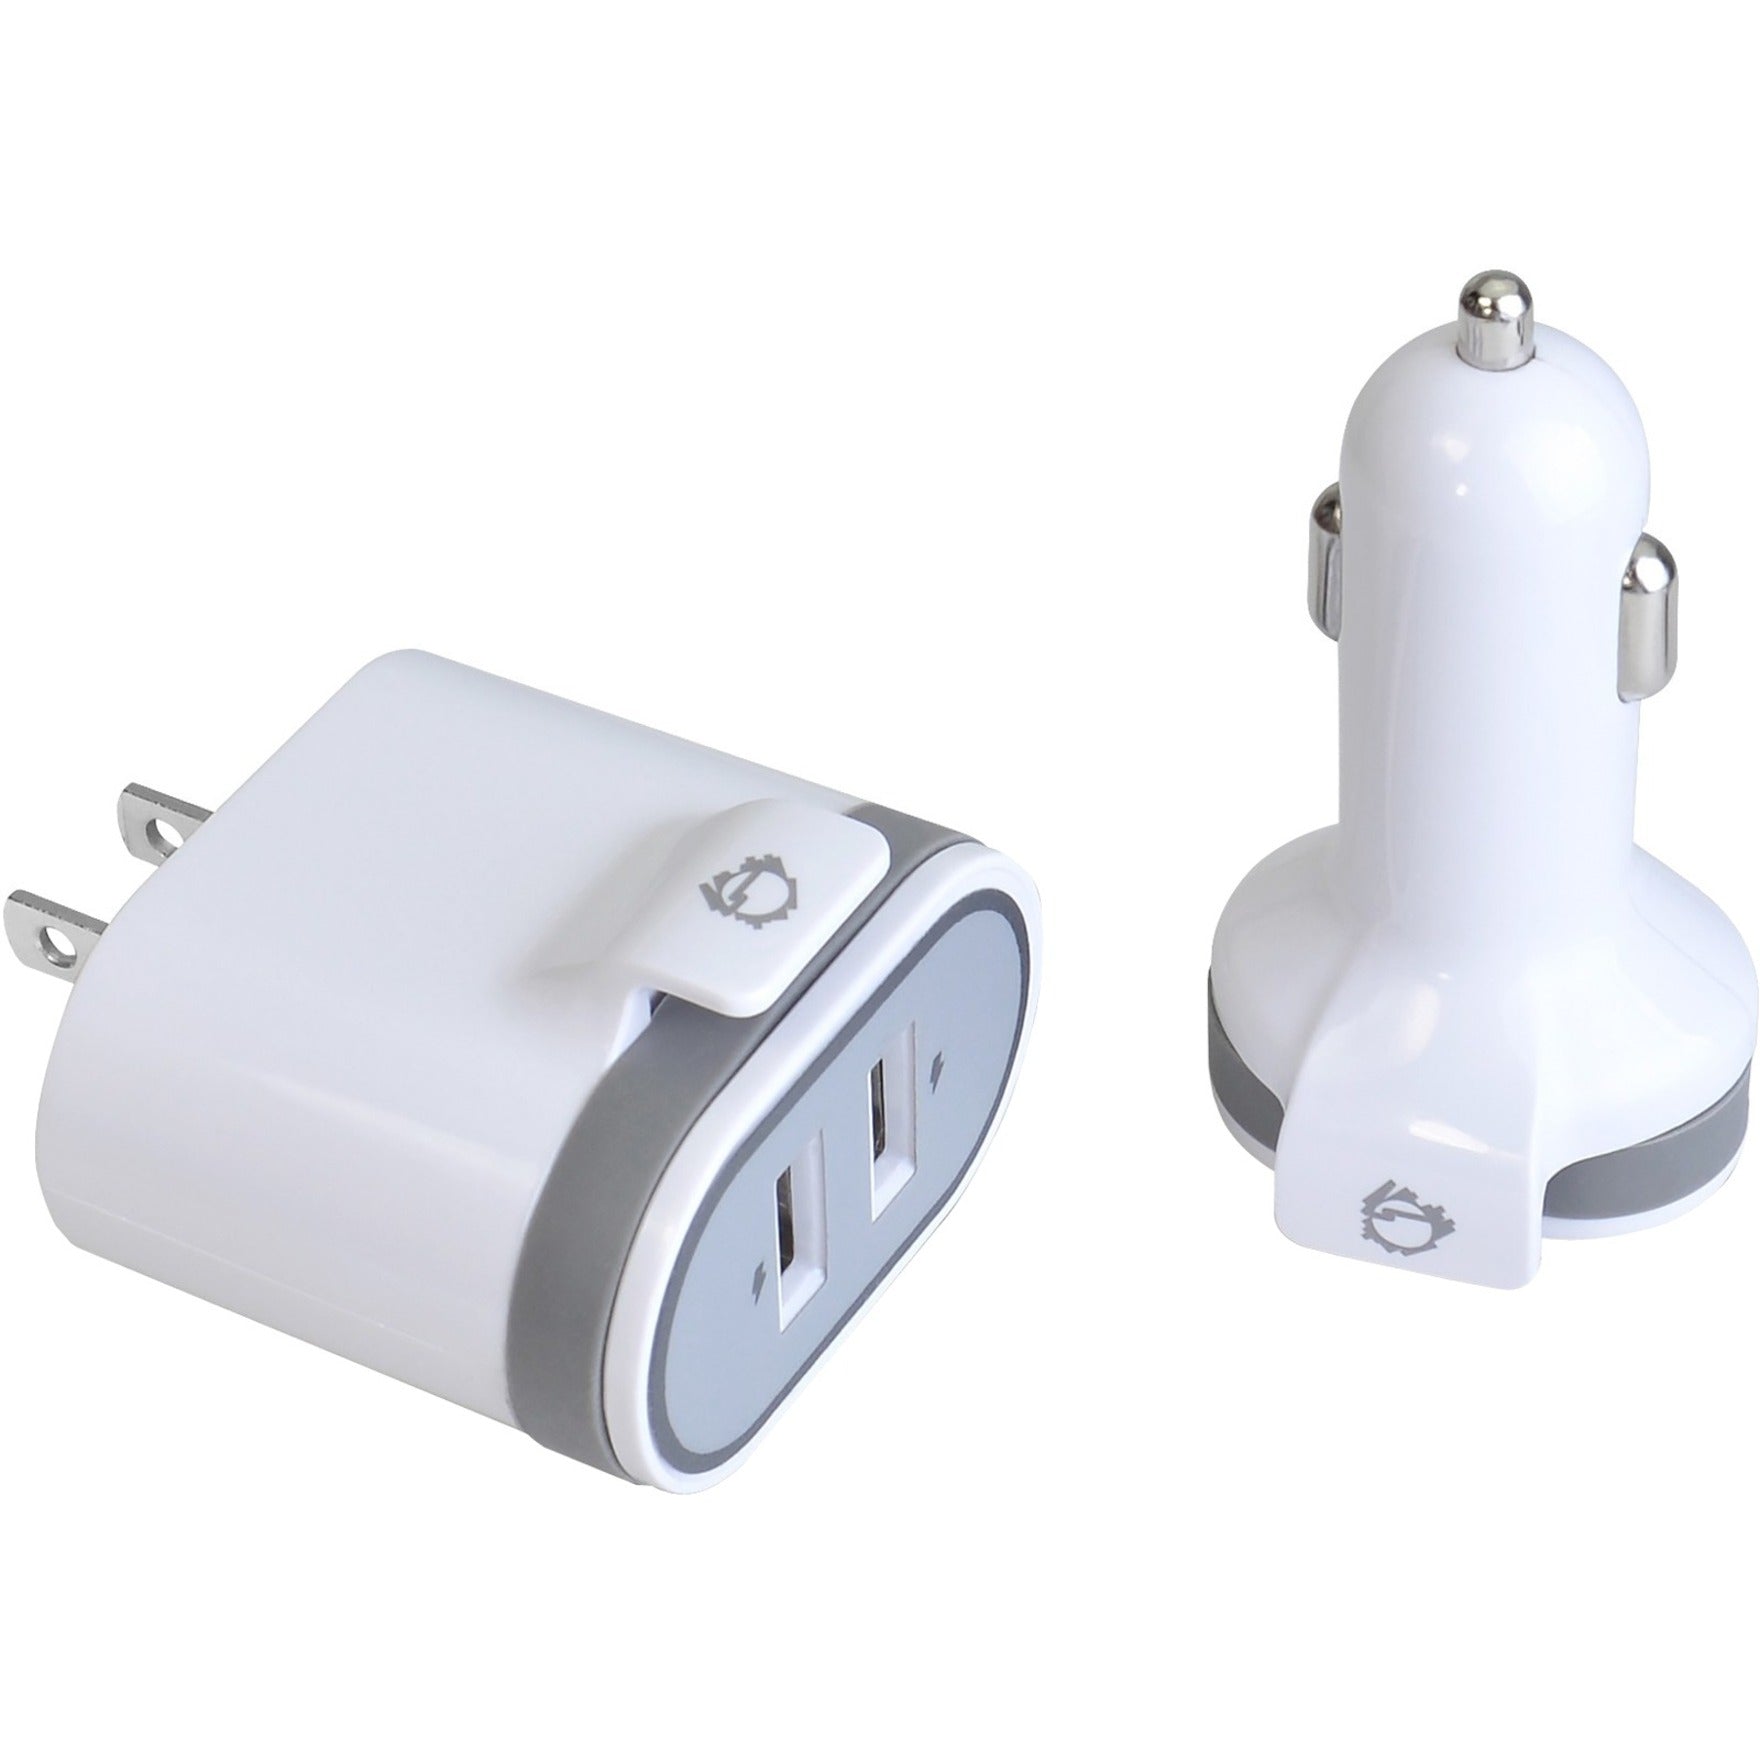 SIIG AC-PW1A22-S1 Fast Charging USB Wall Charger & Car Charger Bundle Pack - White, 3.4A Output, Compatible with iPhone, iPad, Smartphone, Tablet PC